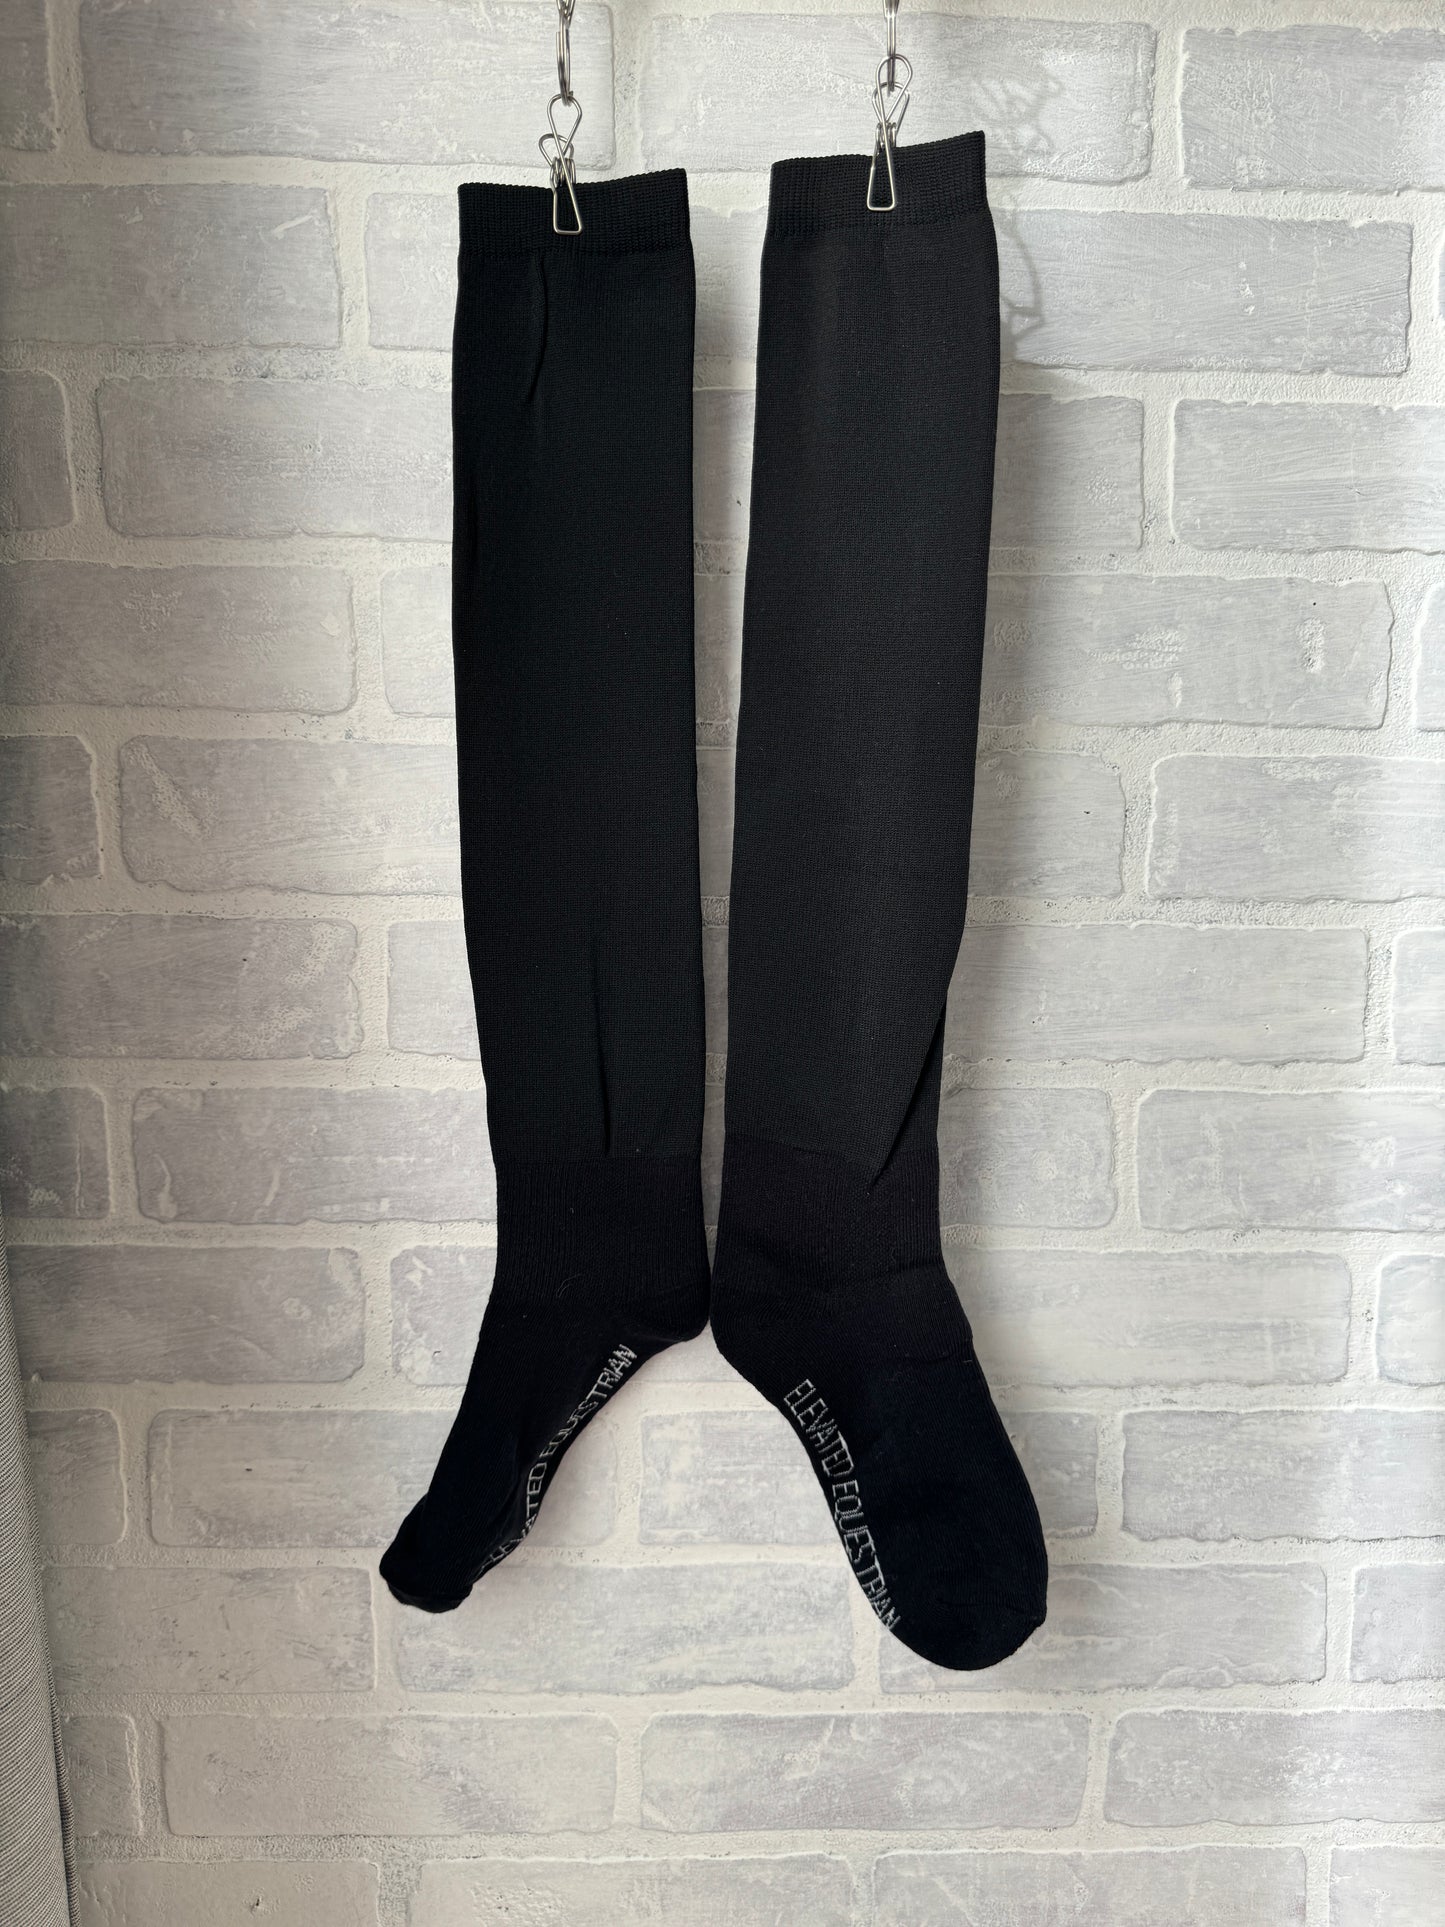 Solid Black Equestrian Over the Calf Boot Socks